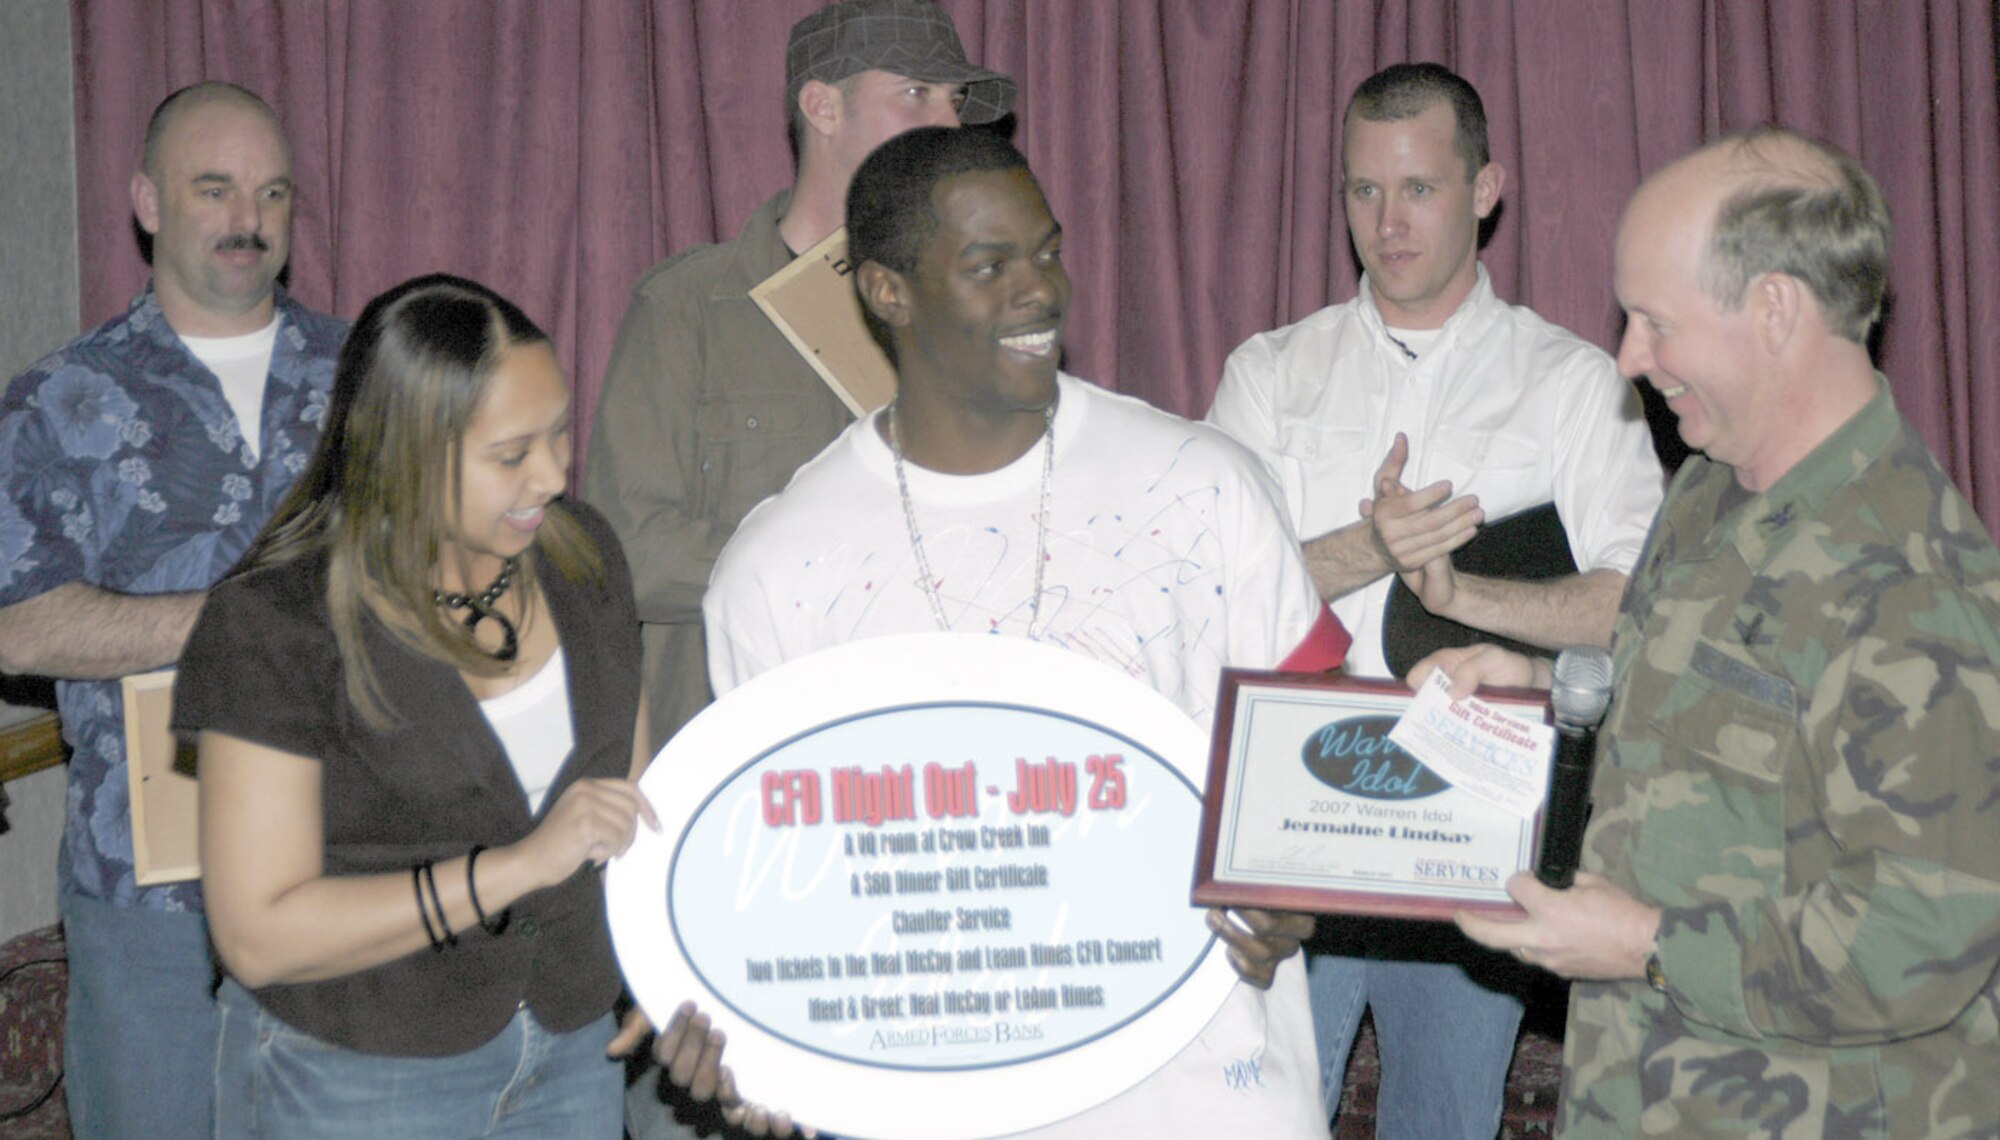 Airman Lindsay receives a Cheyenne Frontier Days night out and certificate from Col. Ron Jenkins, 90th Mission Support Group commander, after he was announced the winner of the 4-week singing competition.